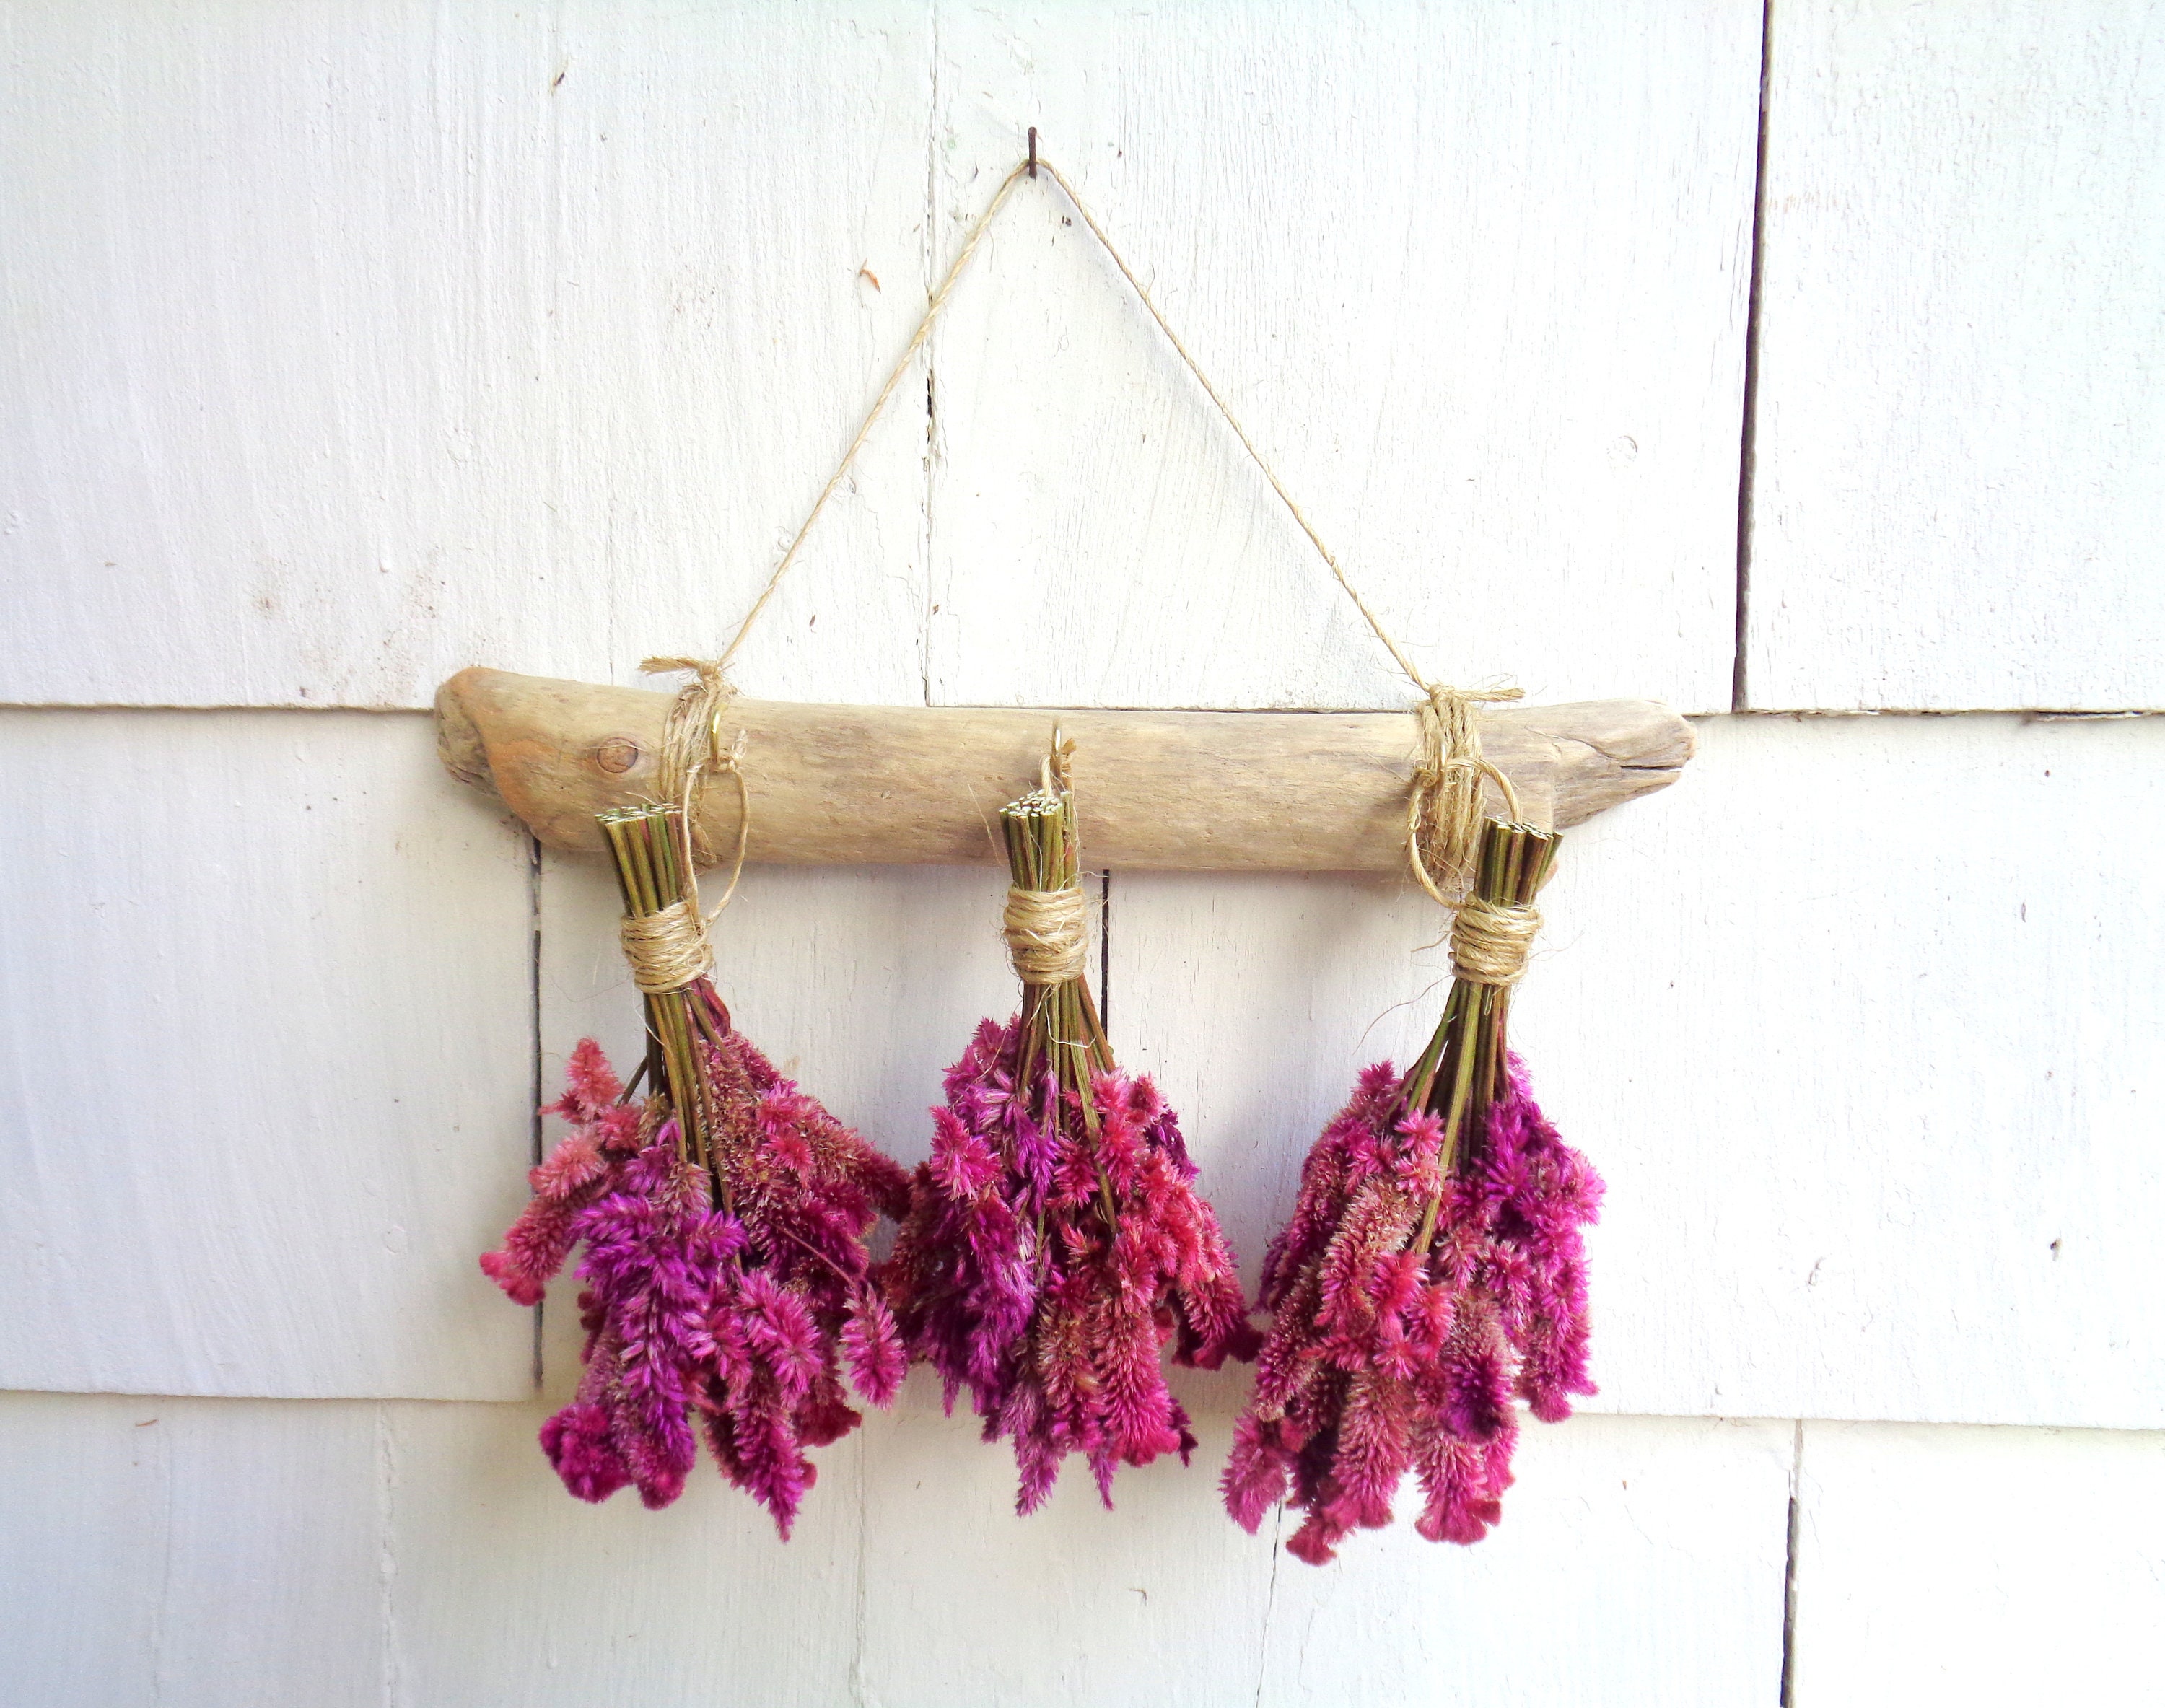 2 Pcs Hanging Drying Rack for Herbs - Macrame Mobile Flower Drying Hanger  with 20 Herb Dryer Hooks, Boho Handcrafted Cotton Rope Chic Woven Herbal